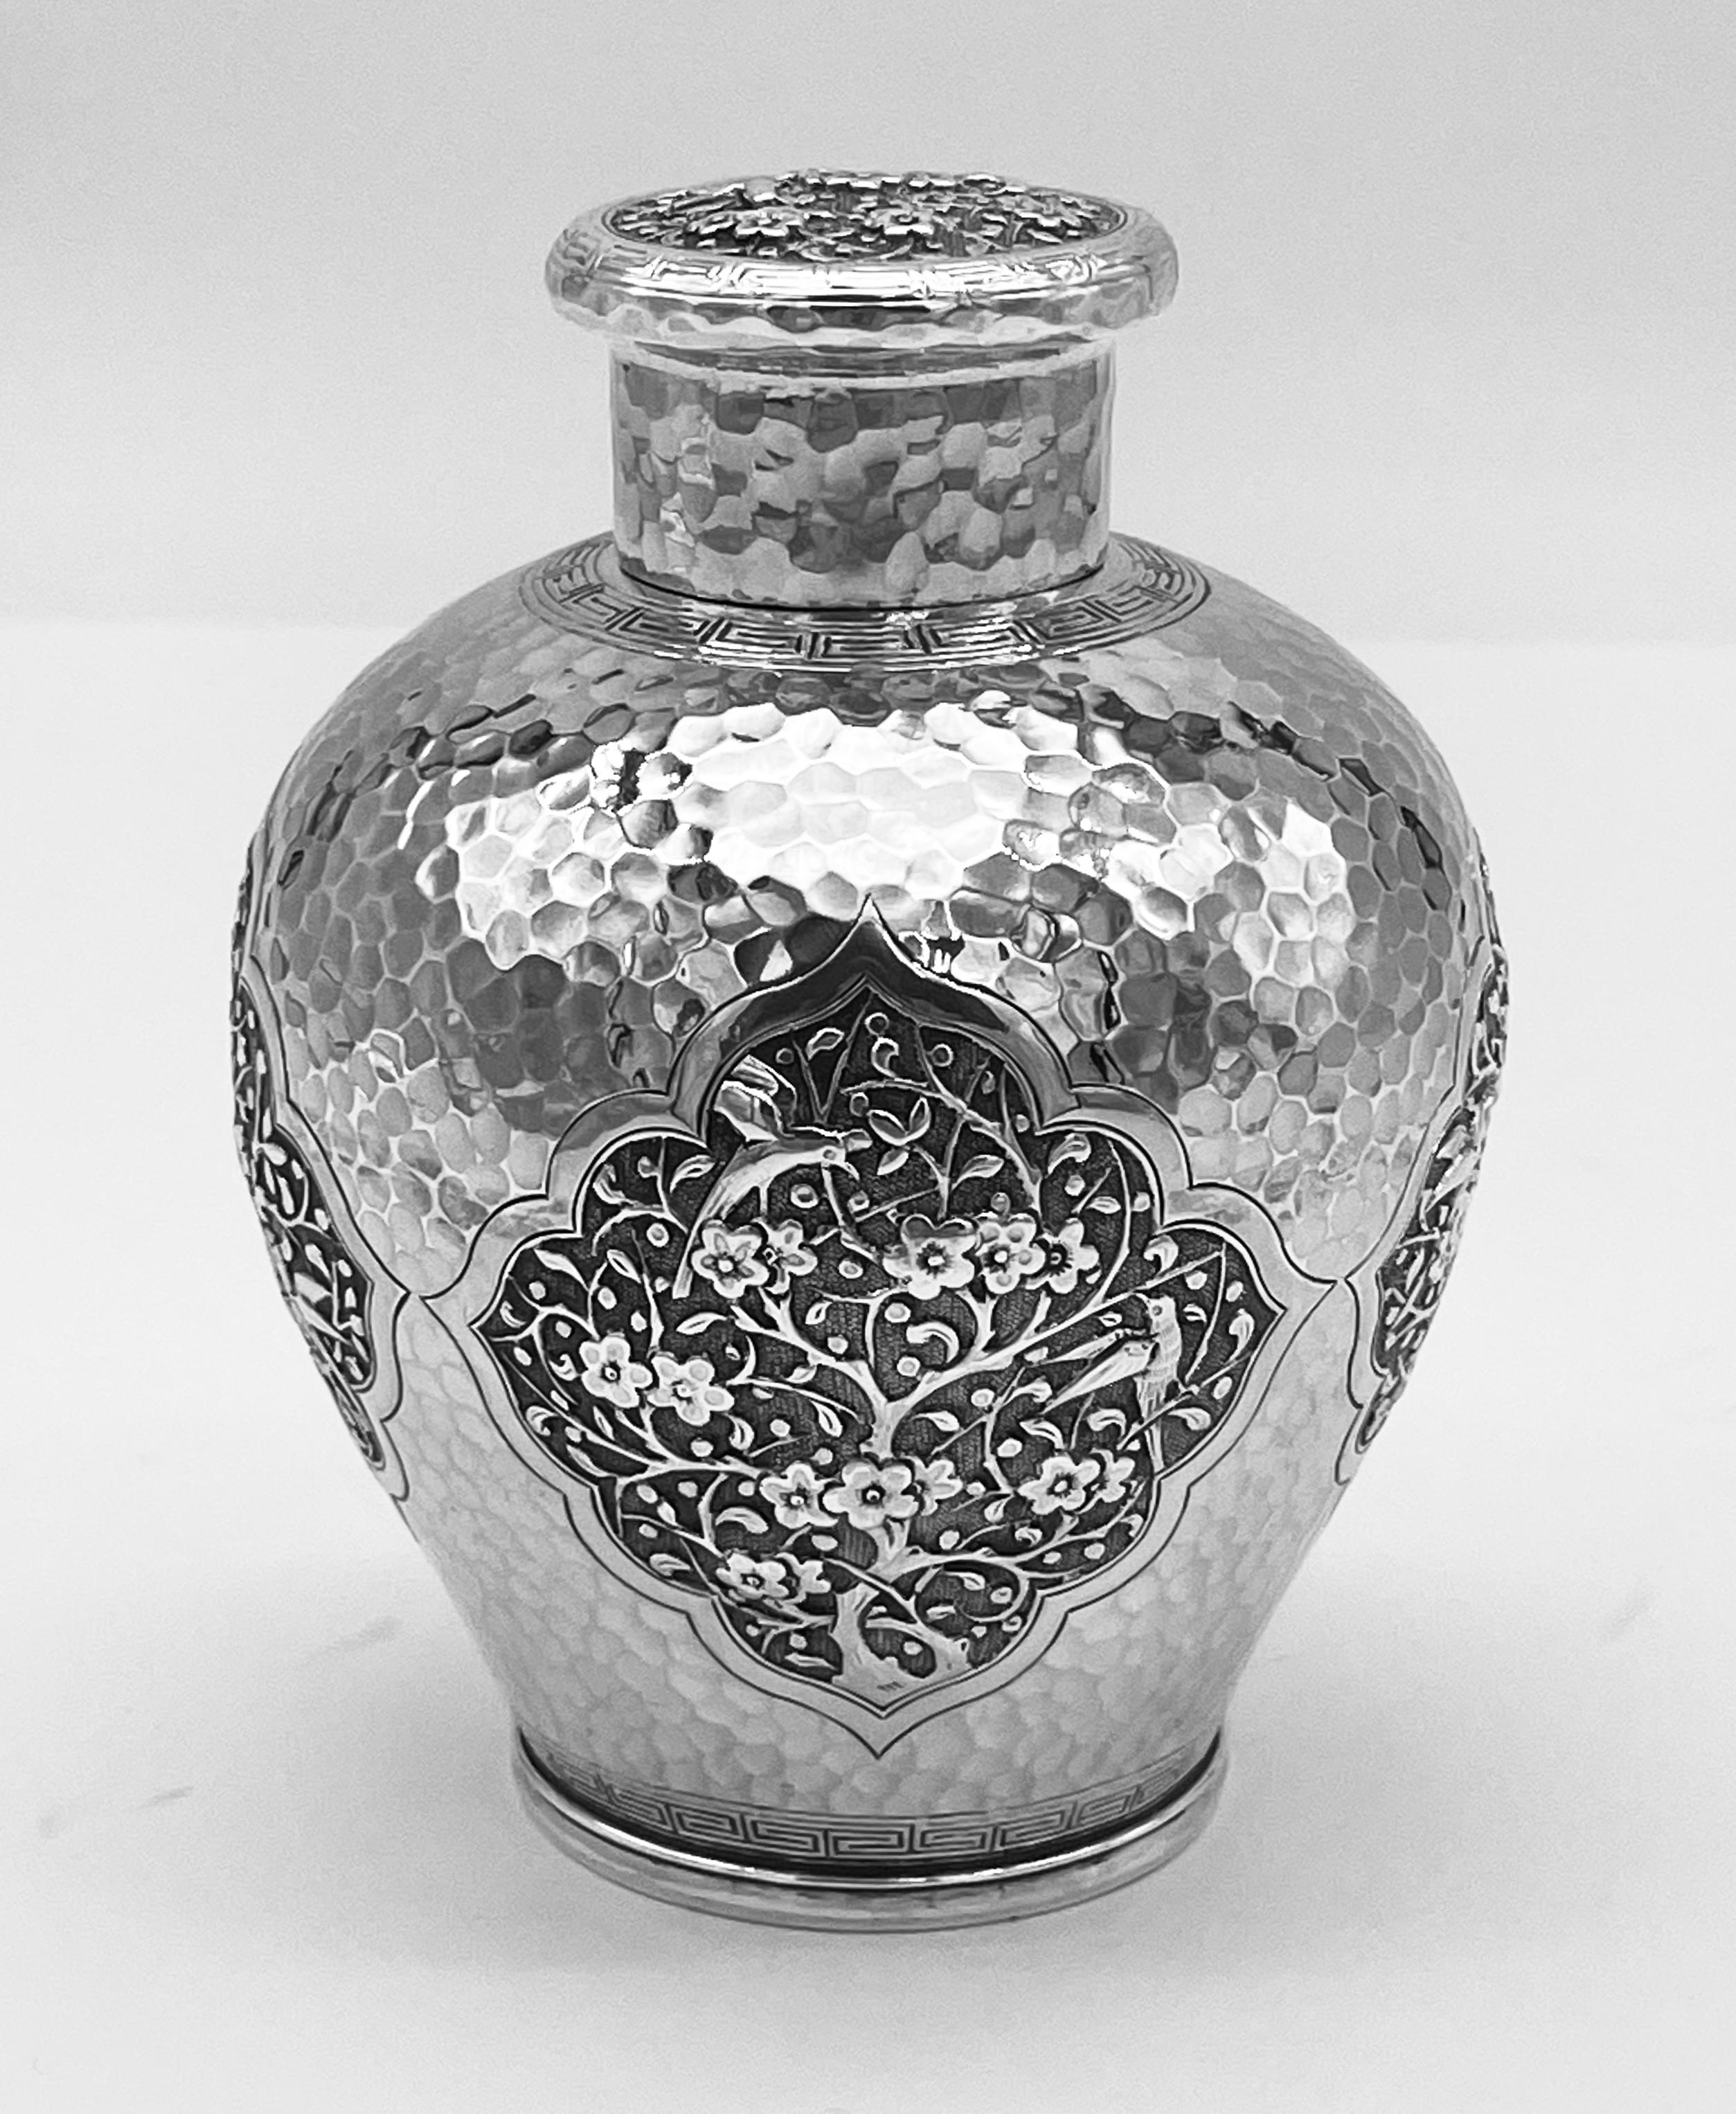 A Chinese Export Silver Tea Caddy embossed and chased with four shaped panels each decorated with prunus and birds, circa 1890. The body has a hammered background and a band of Greek-key decorationa, and the pull-off lid has prunus flowers and two